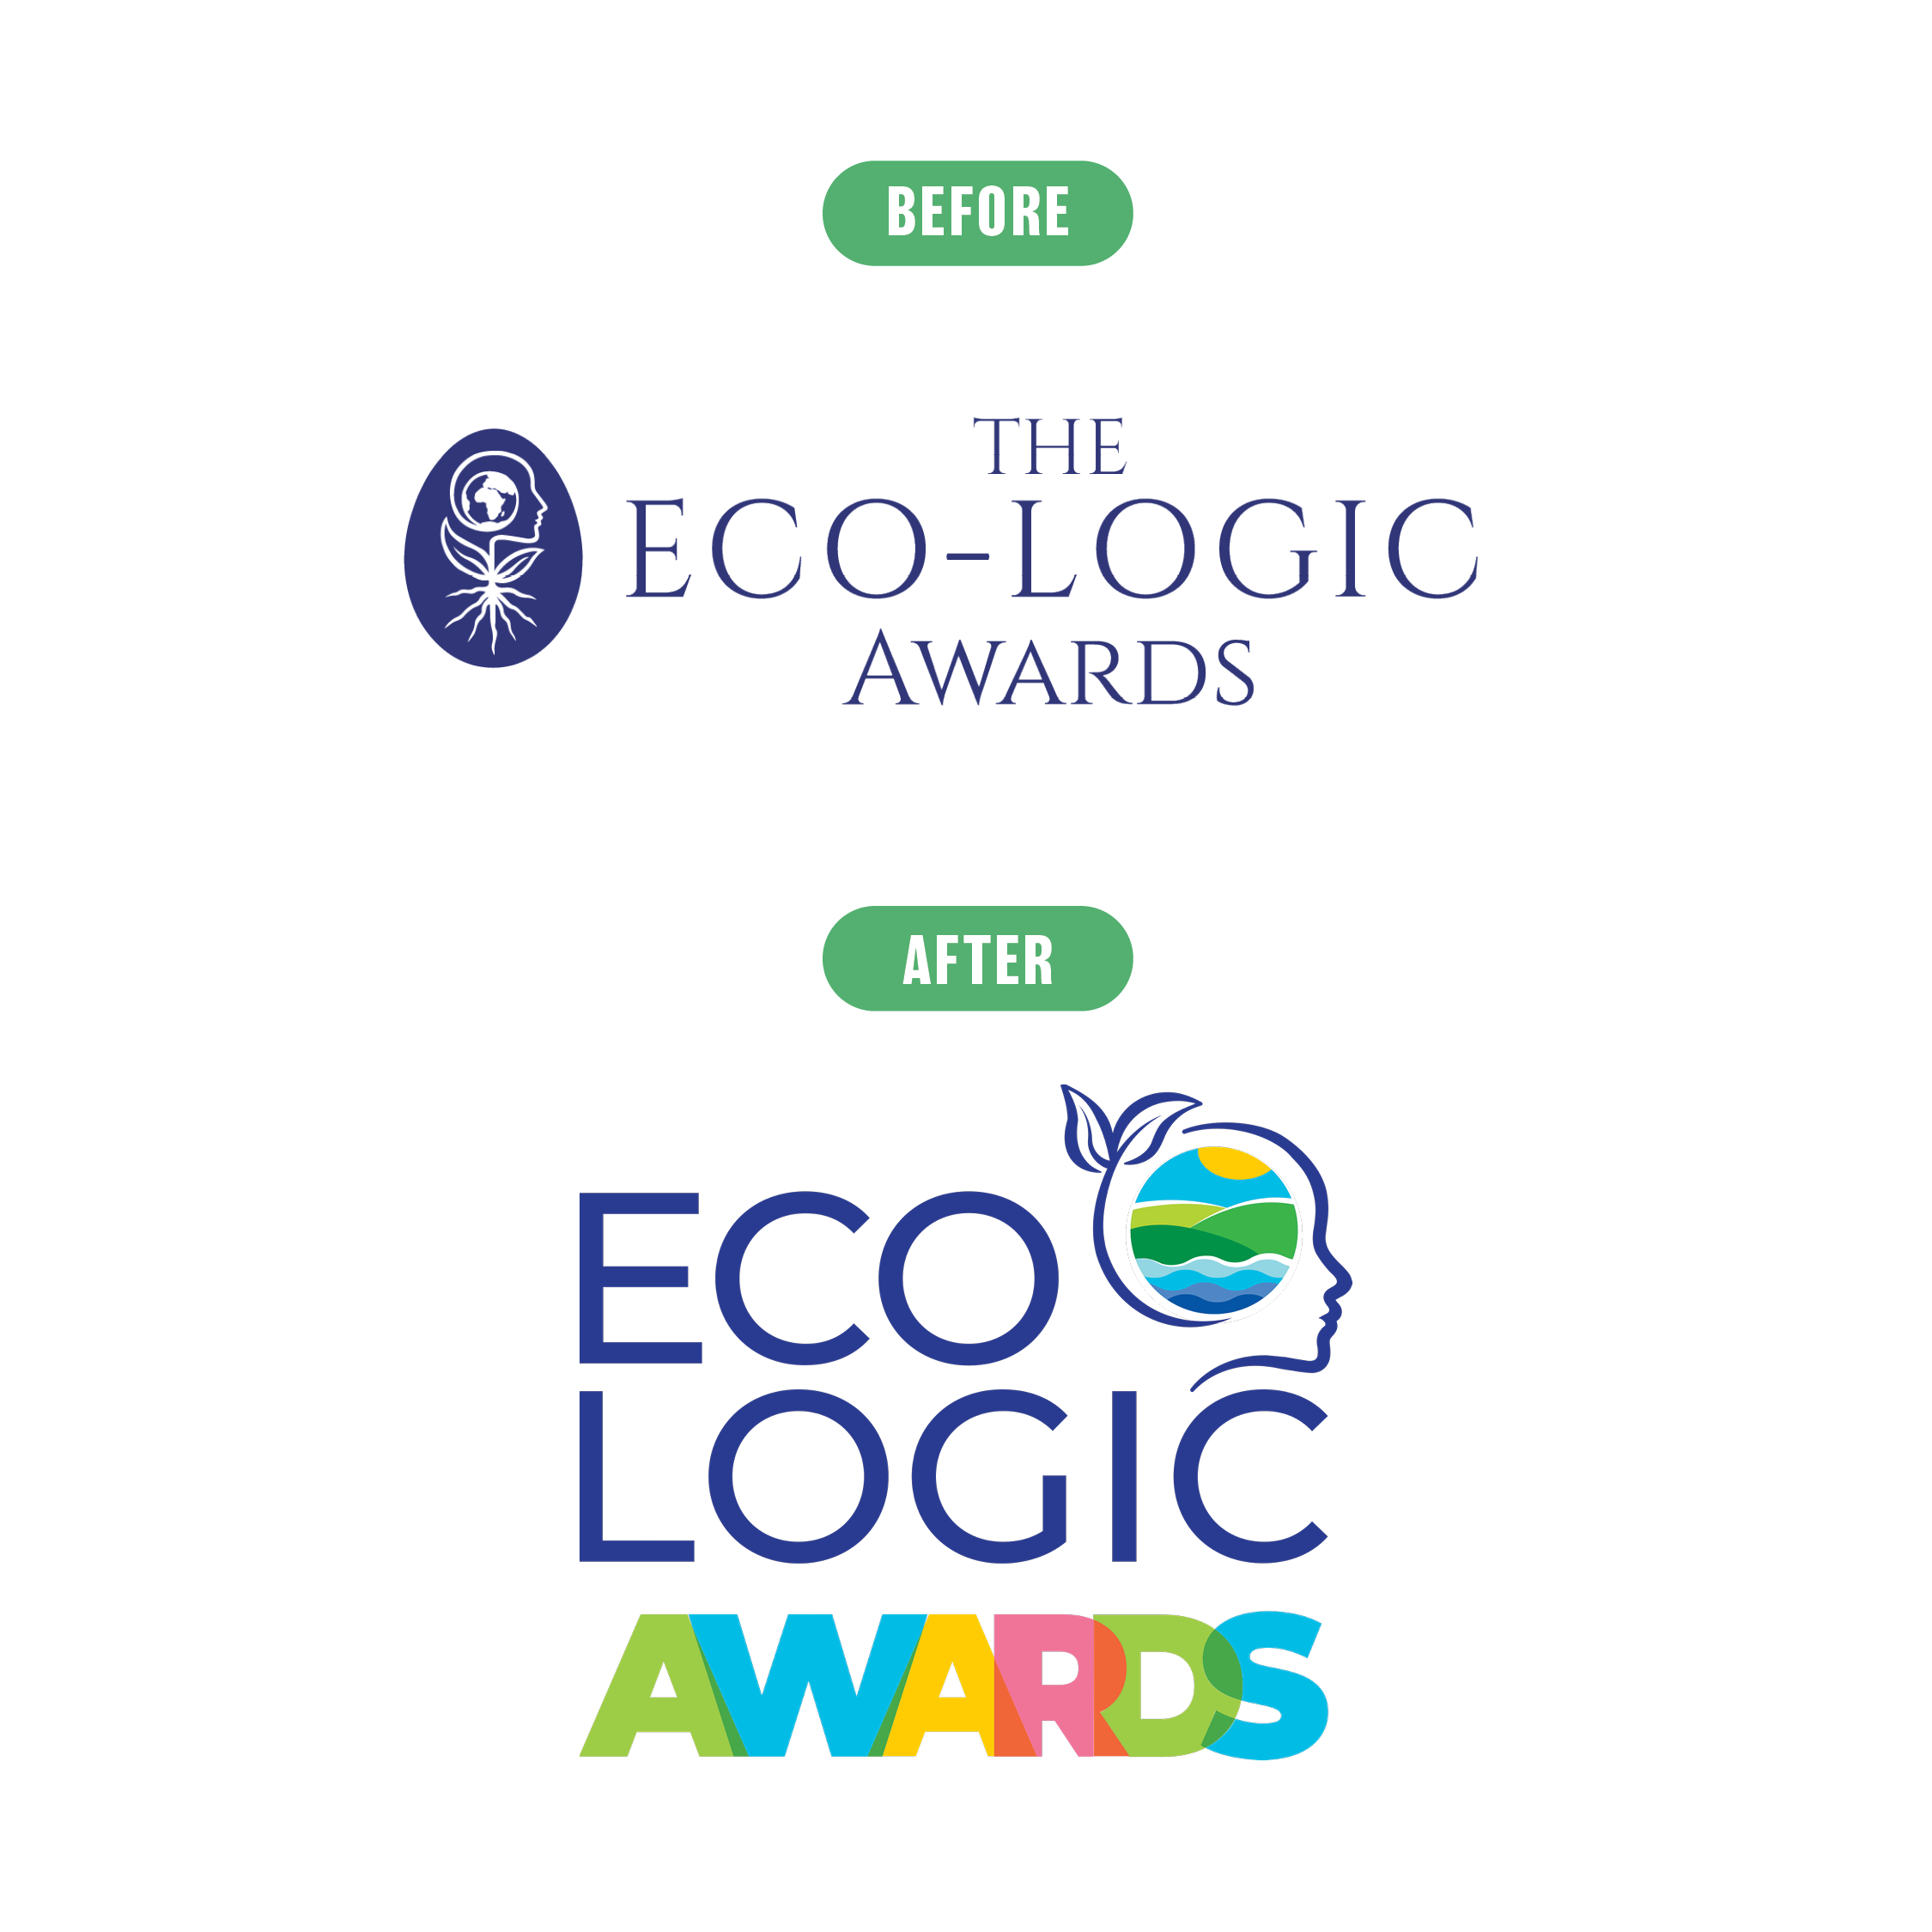 Eco-Logic Awards logo before and after